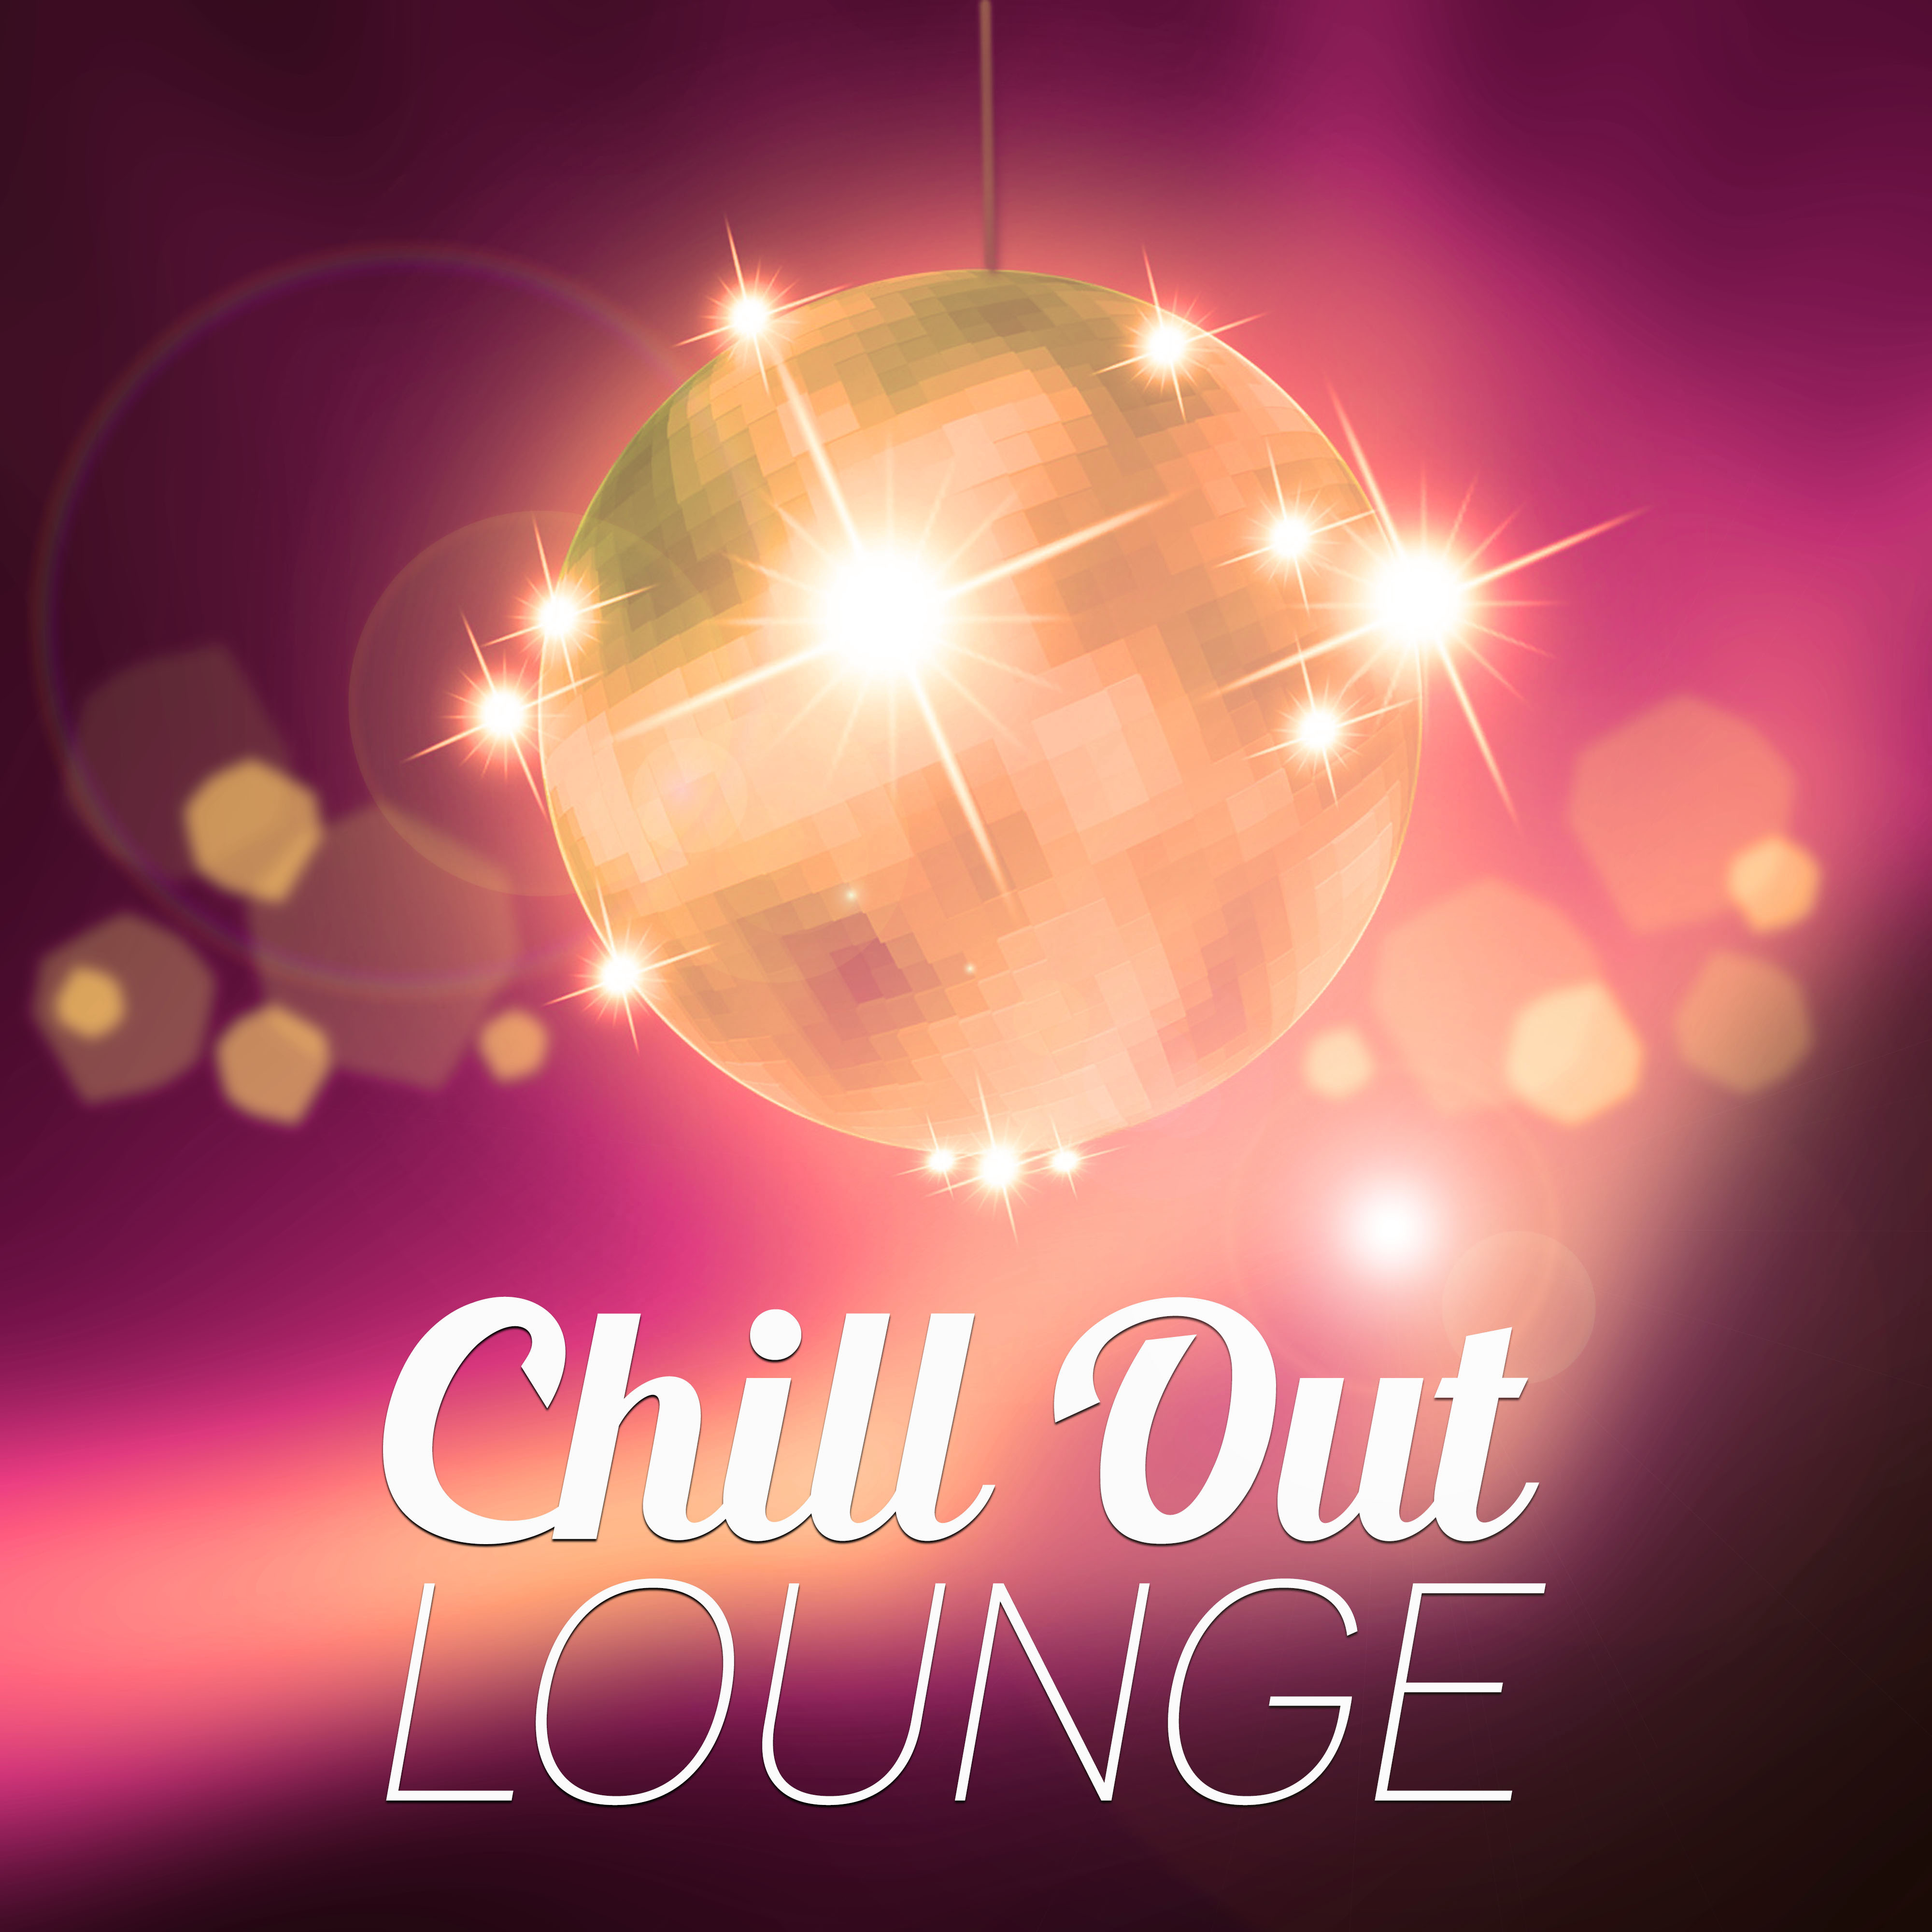 Chill Out Lounge - Lounge Summer, Light Chill Out, Chill Out Party